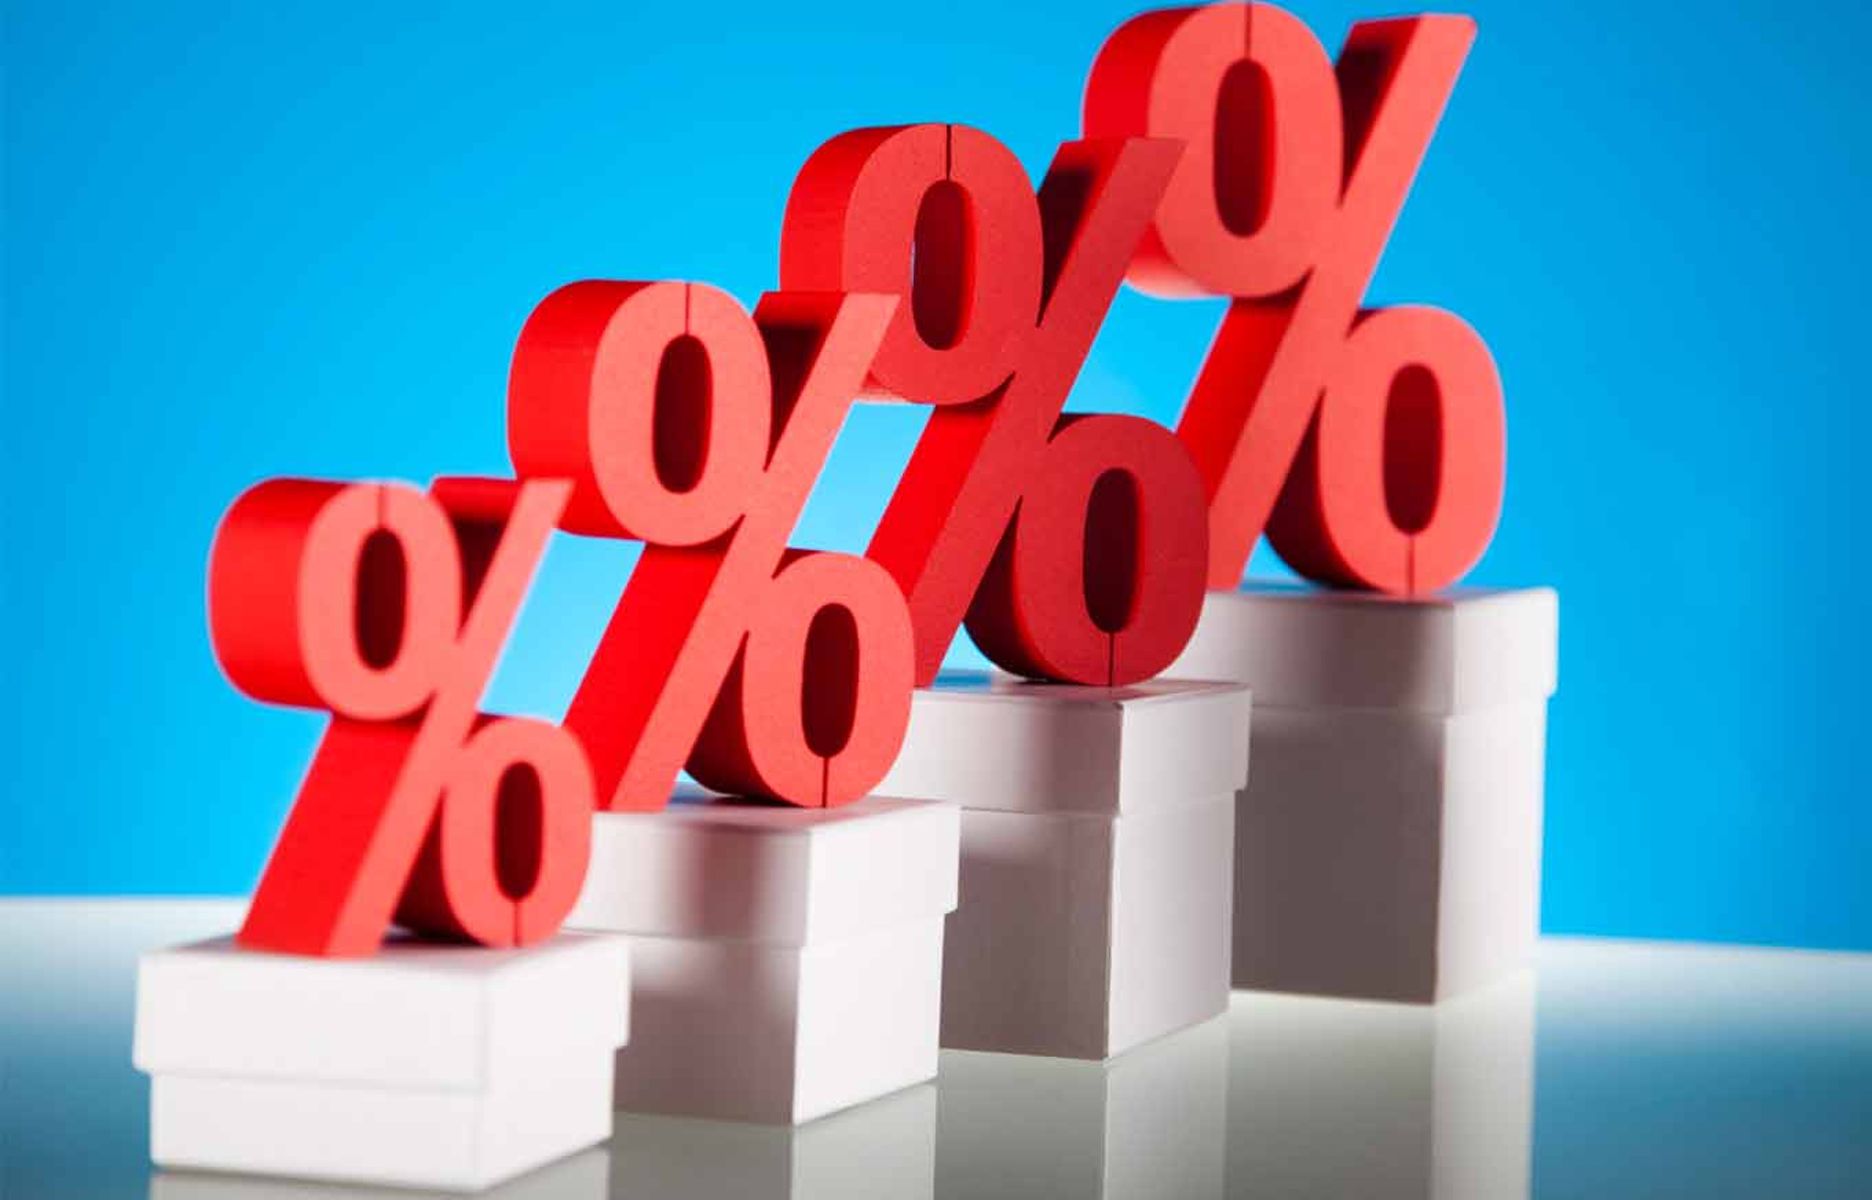 Rates remain on hold as property prices continue to fall